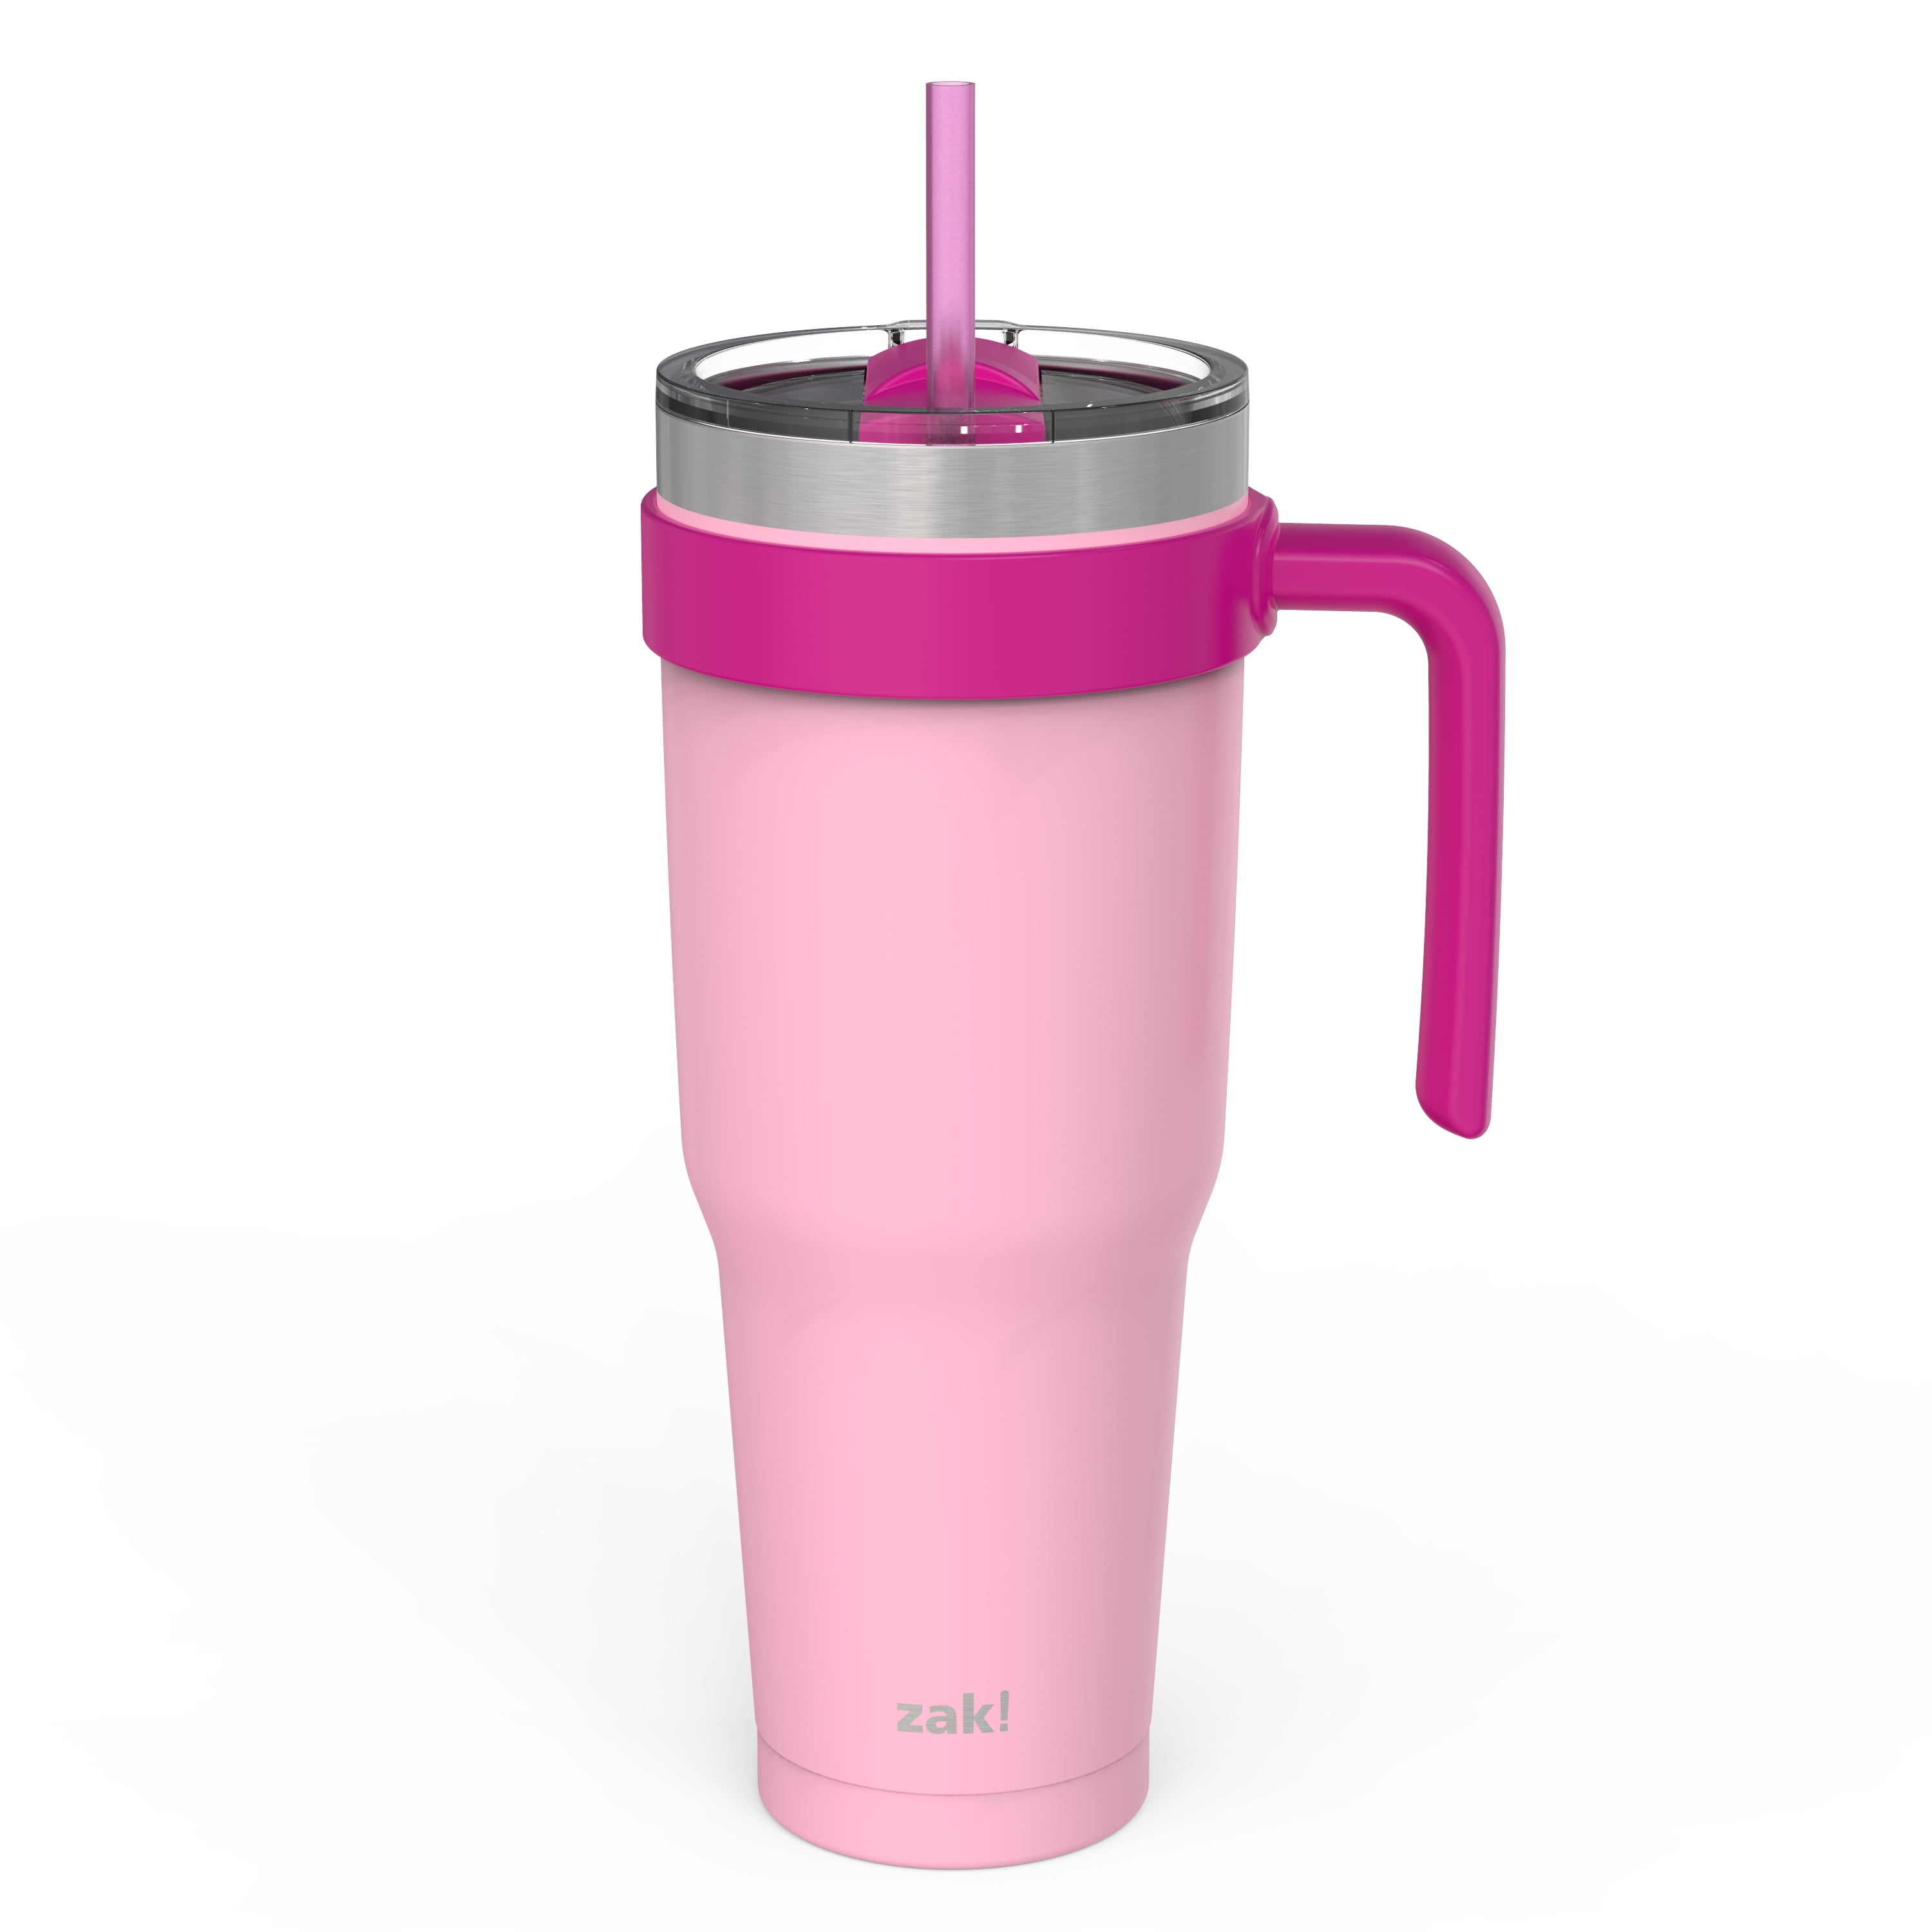 Zak Designs 40 Ounce Stainless Steel Tumbler, Pink Coral - Walmart.com